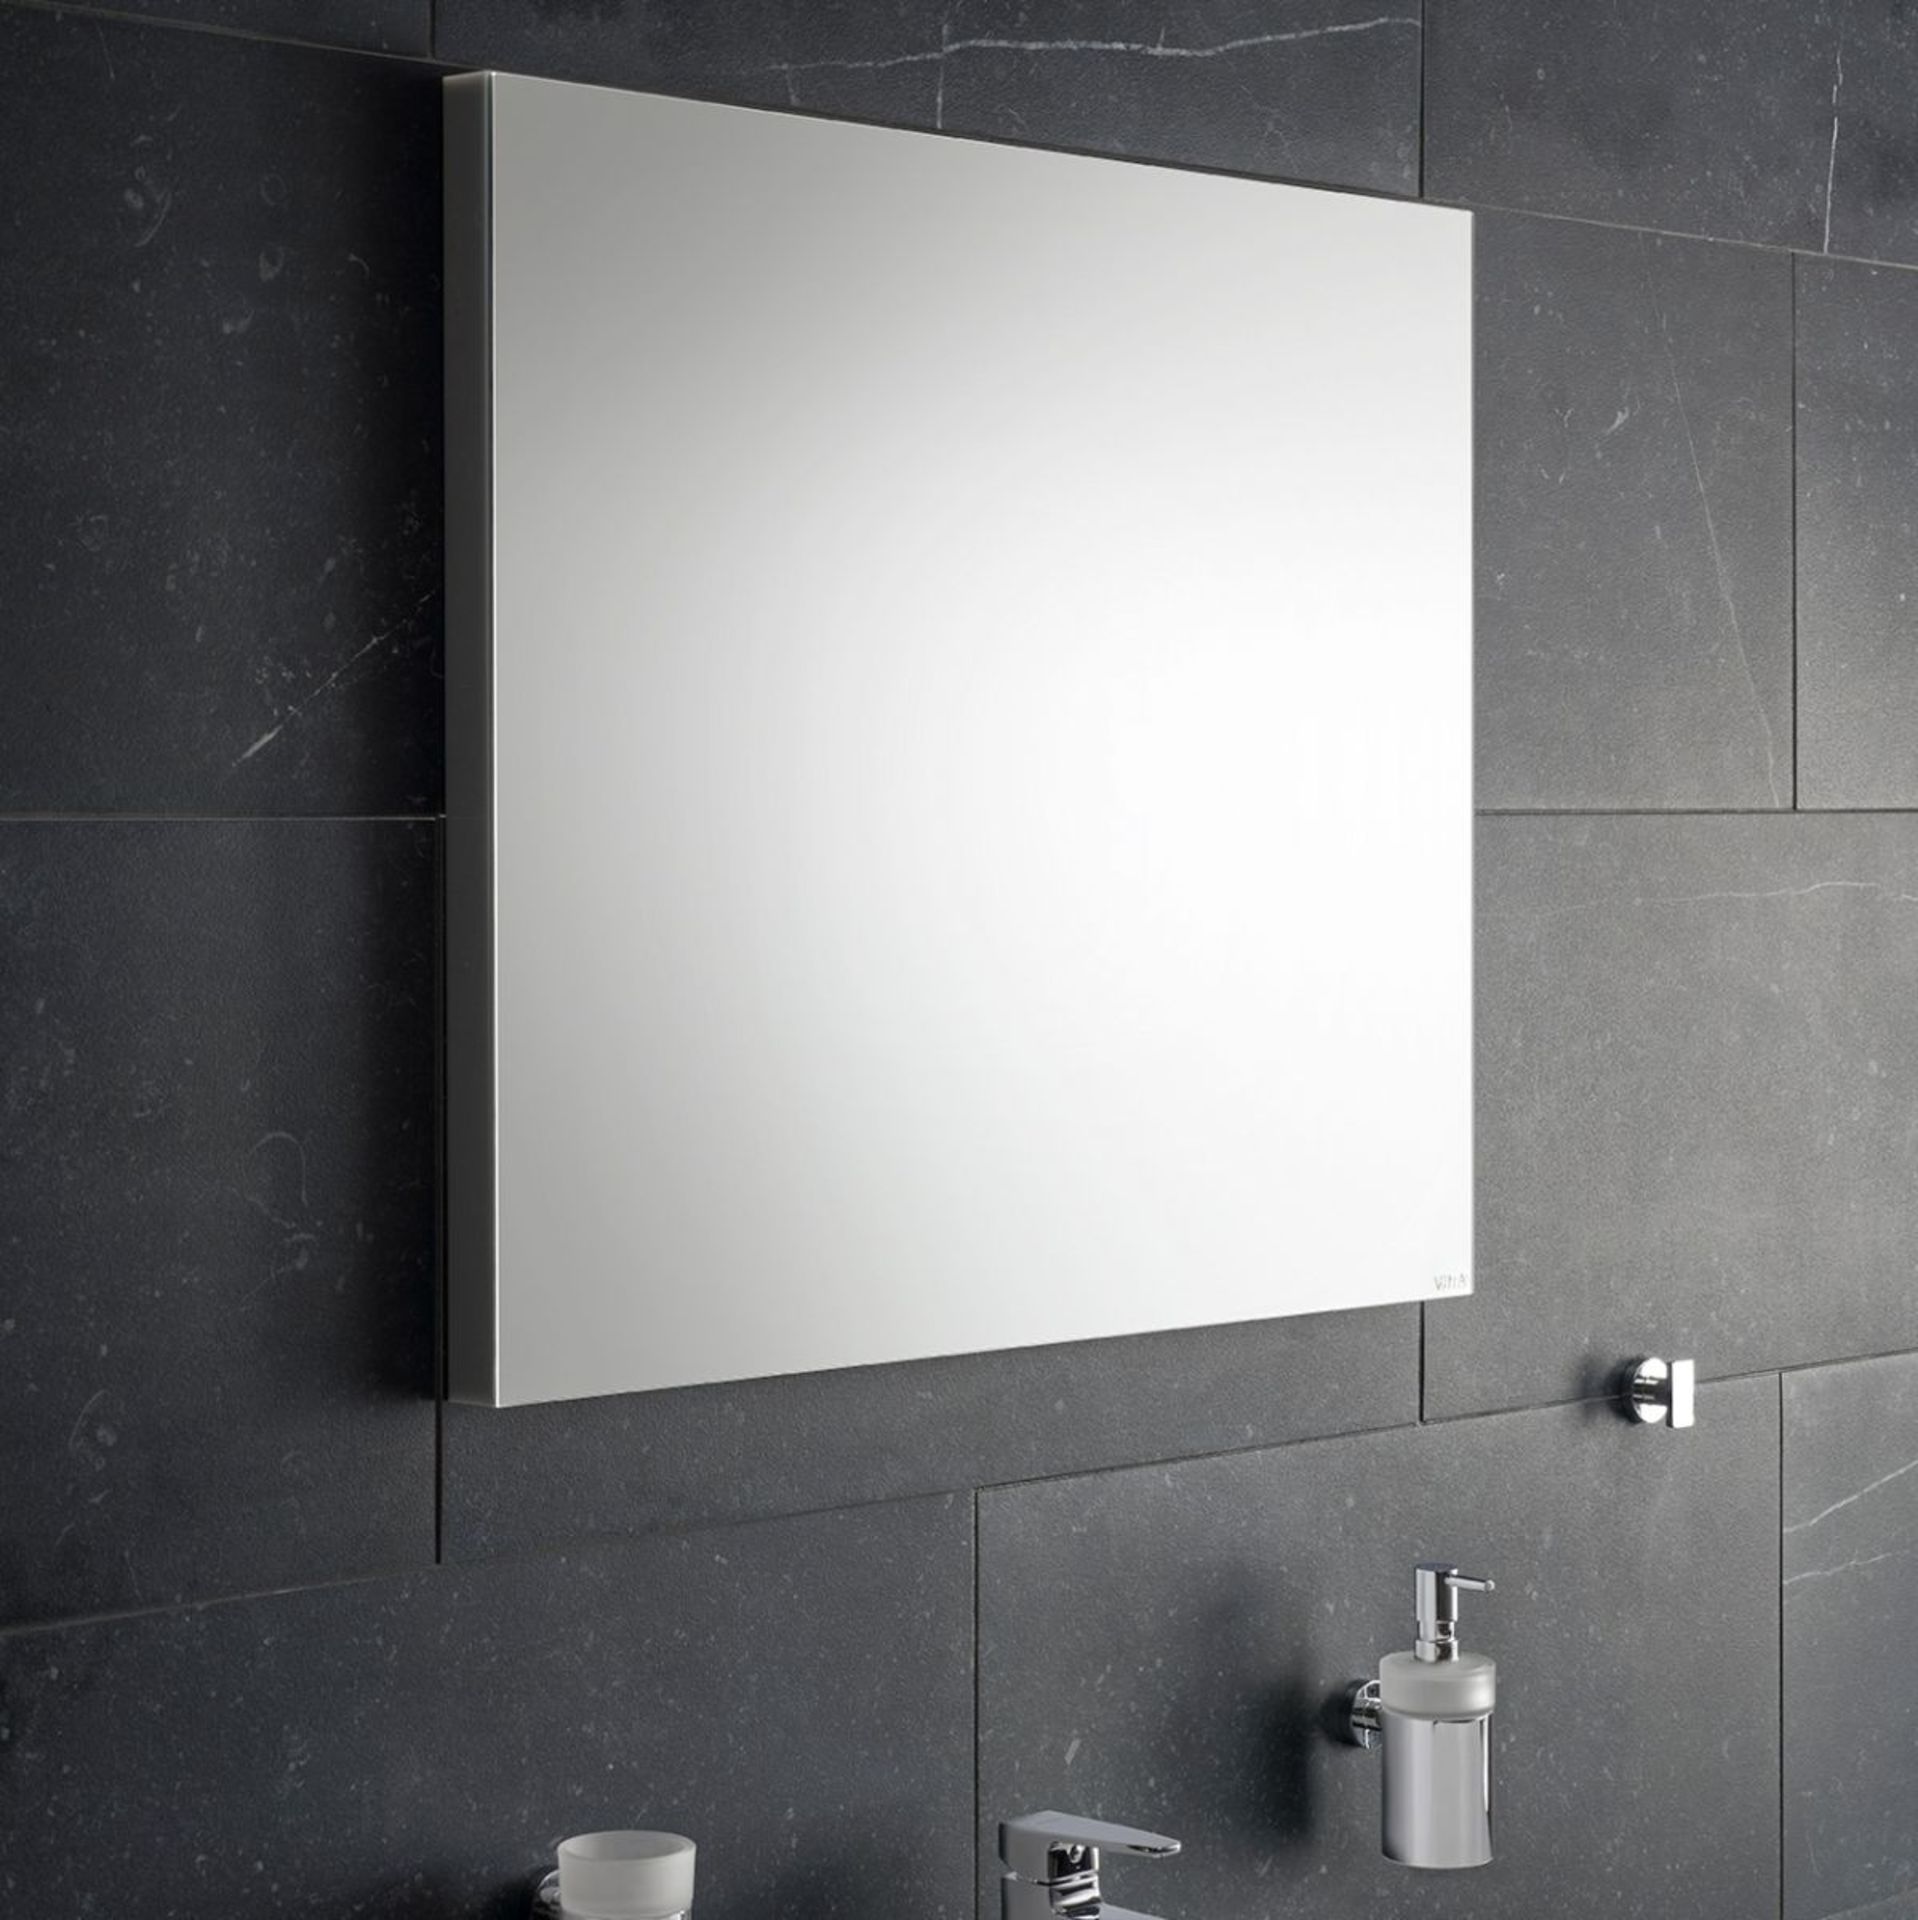 1 x VitrA Brite Illuminated 120cm Bathroom Mirror With On/Off Touch Control - New - RRP £276 - Image 2 of 3